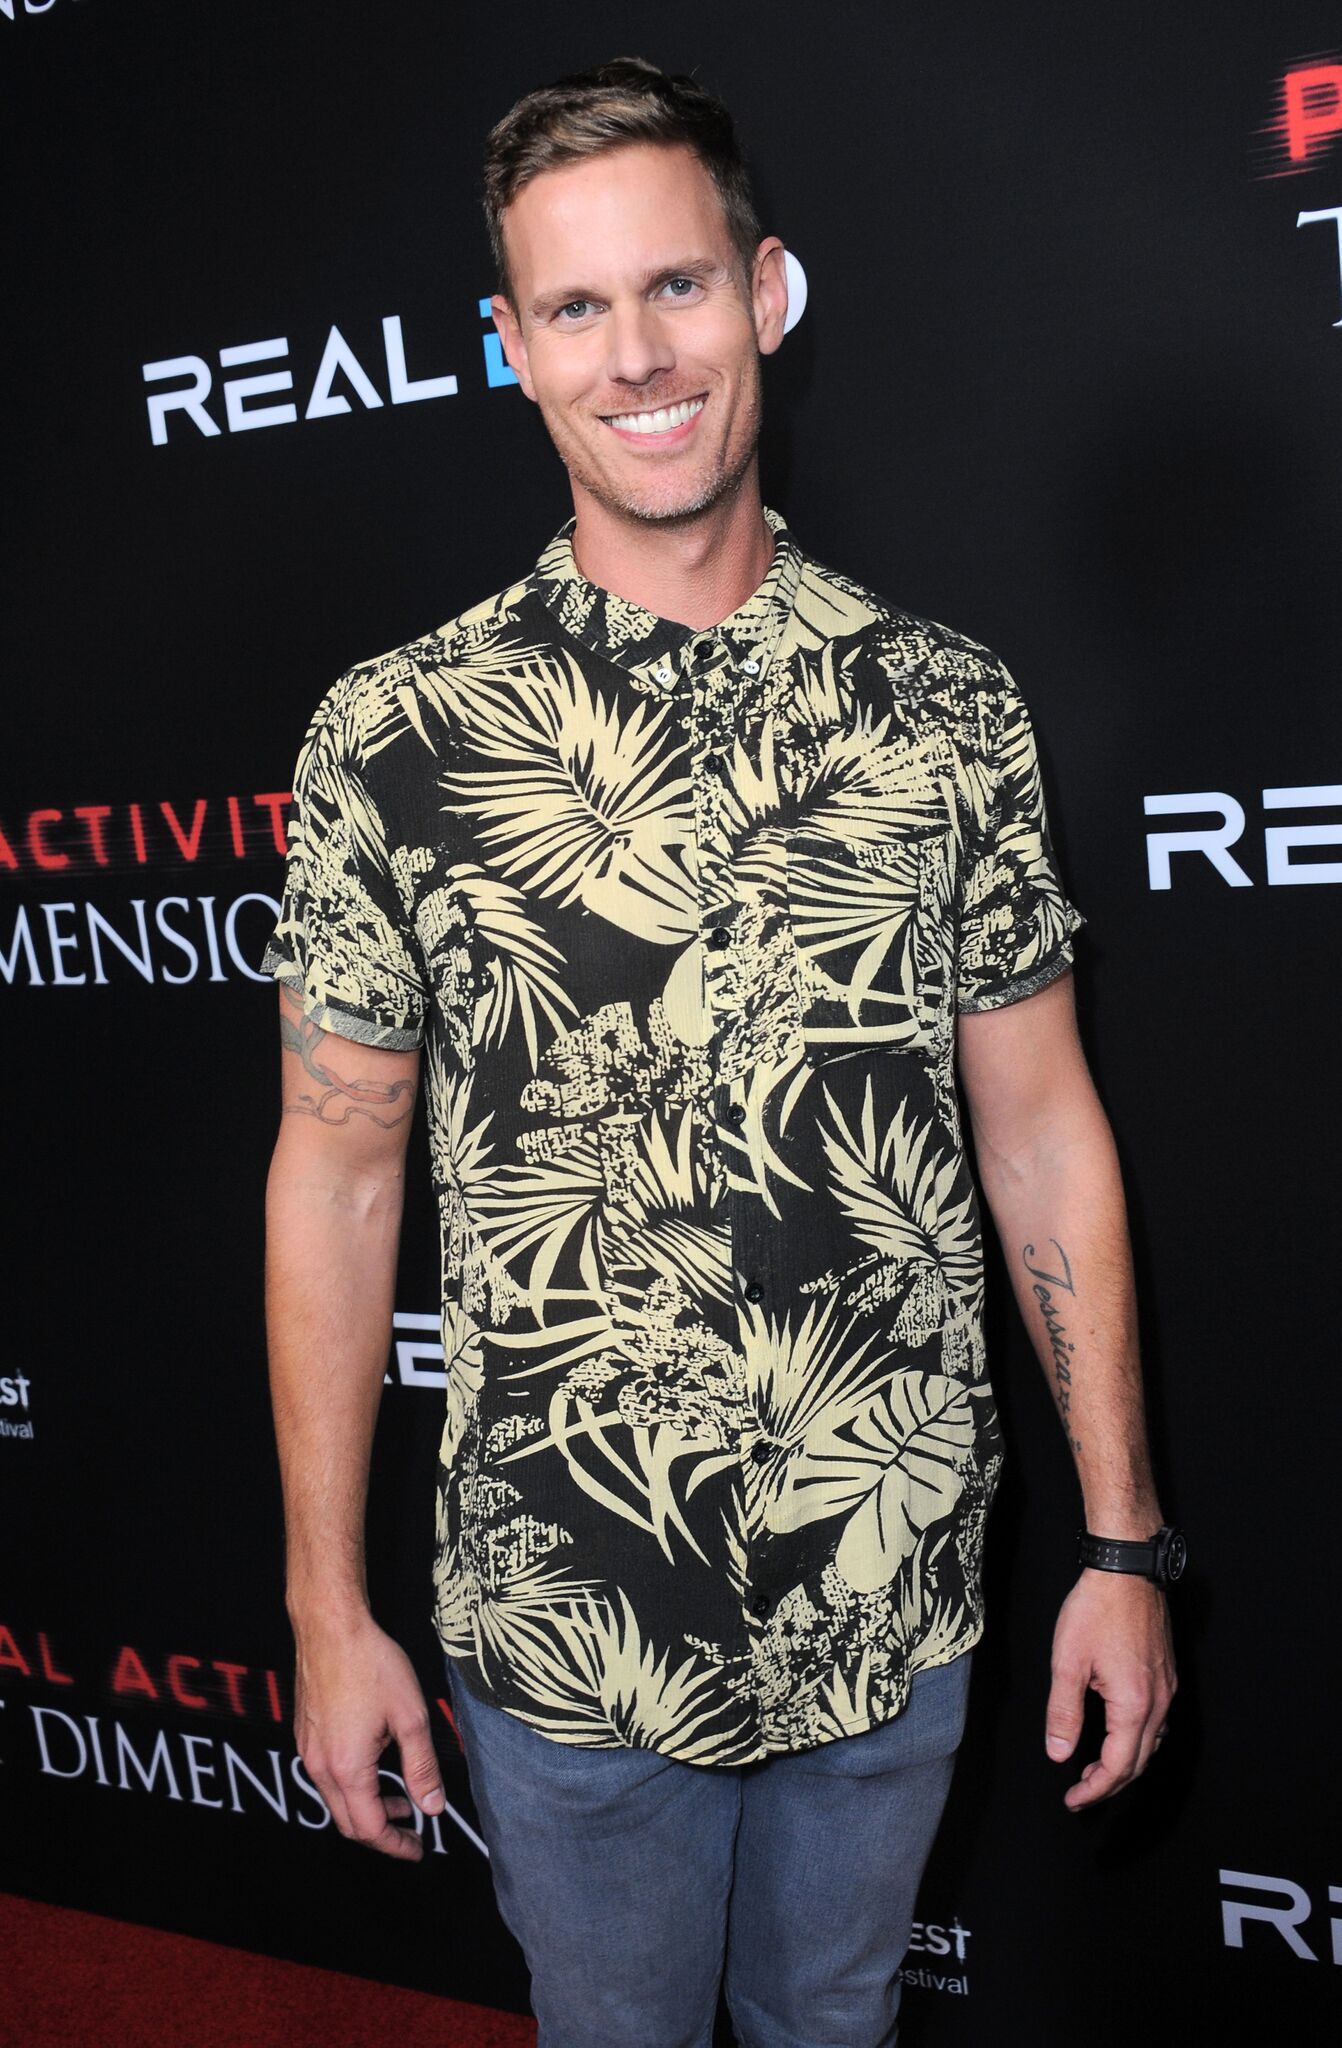  Christopher Landon arrives for the Screamfest Closing Night - Screening Of Paramount Pictures' "Paranormal Activity: The Ghost Dimension"  | Getty Images